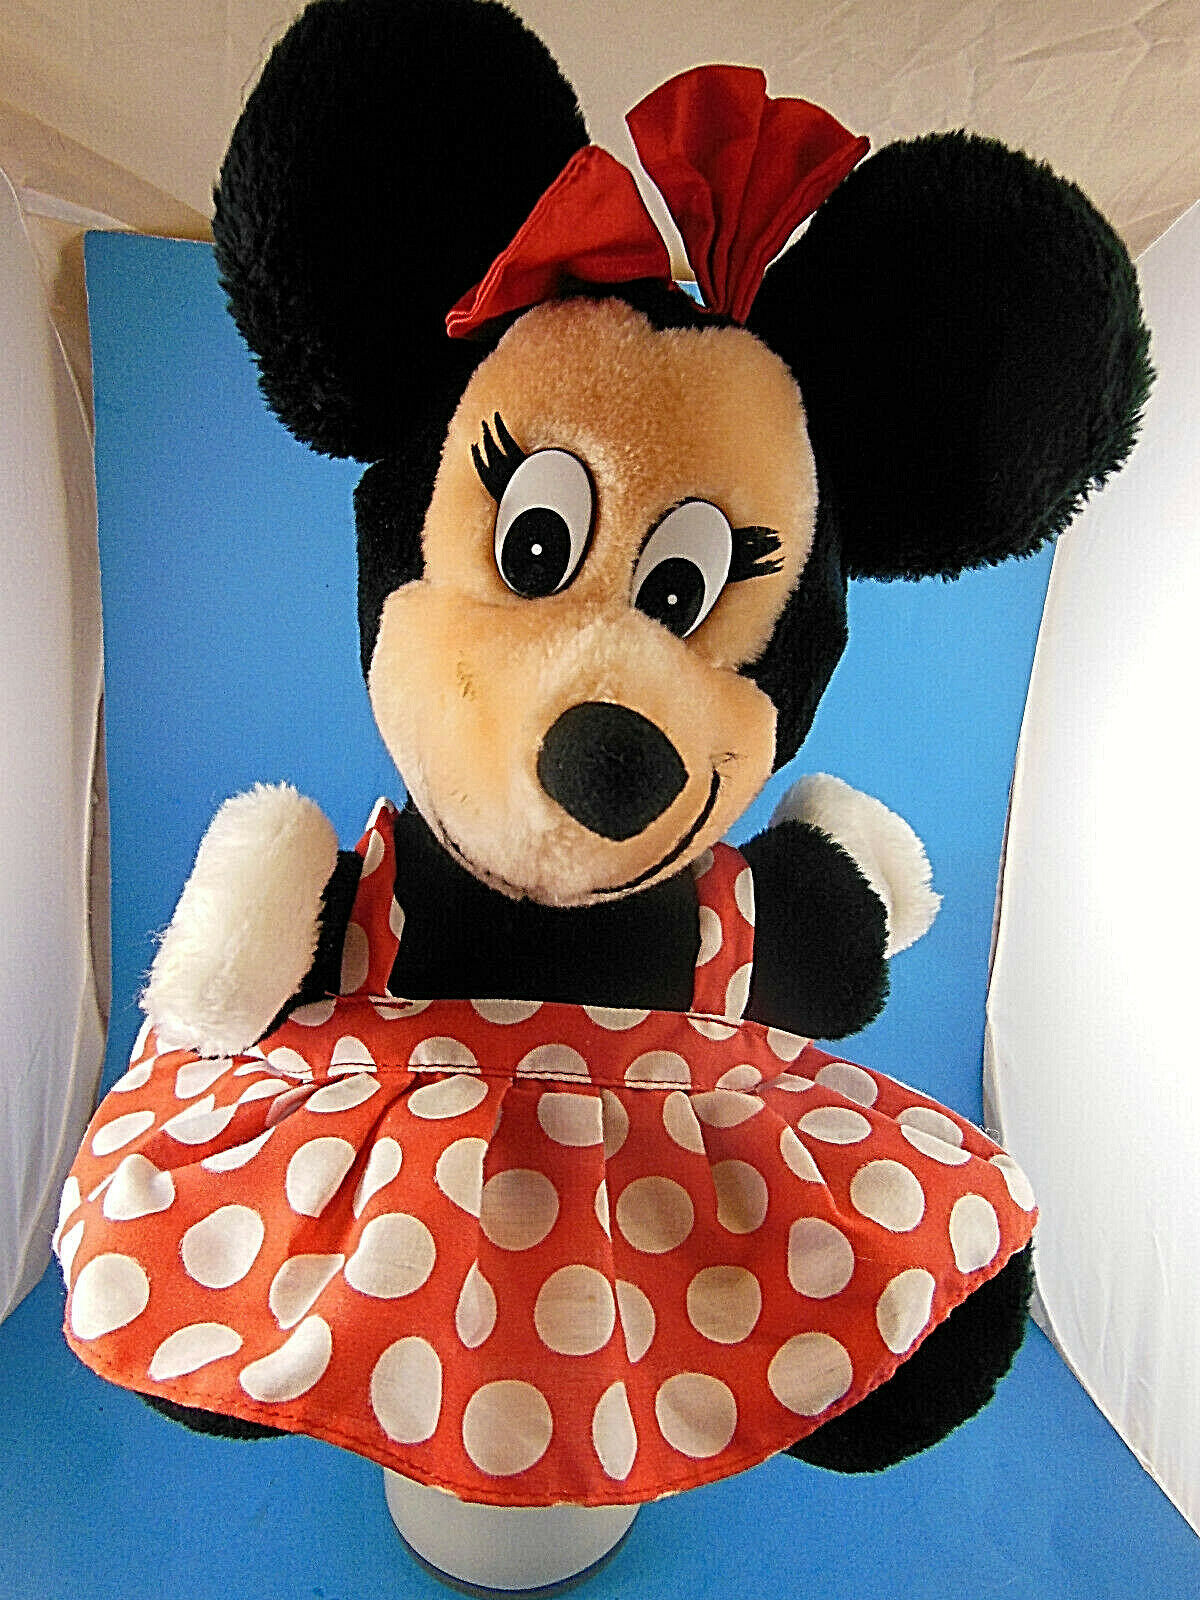 Primary image for Applause Minnie Mouse puppet Disney plush doll 12" with polka dot jumper vintage